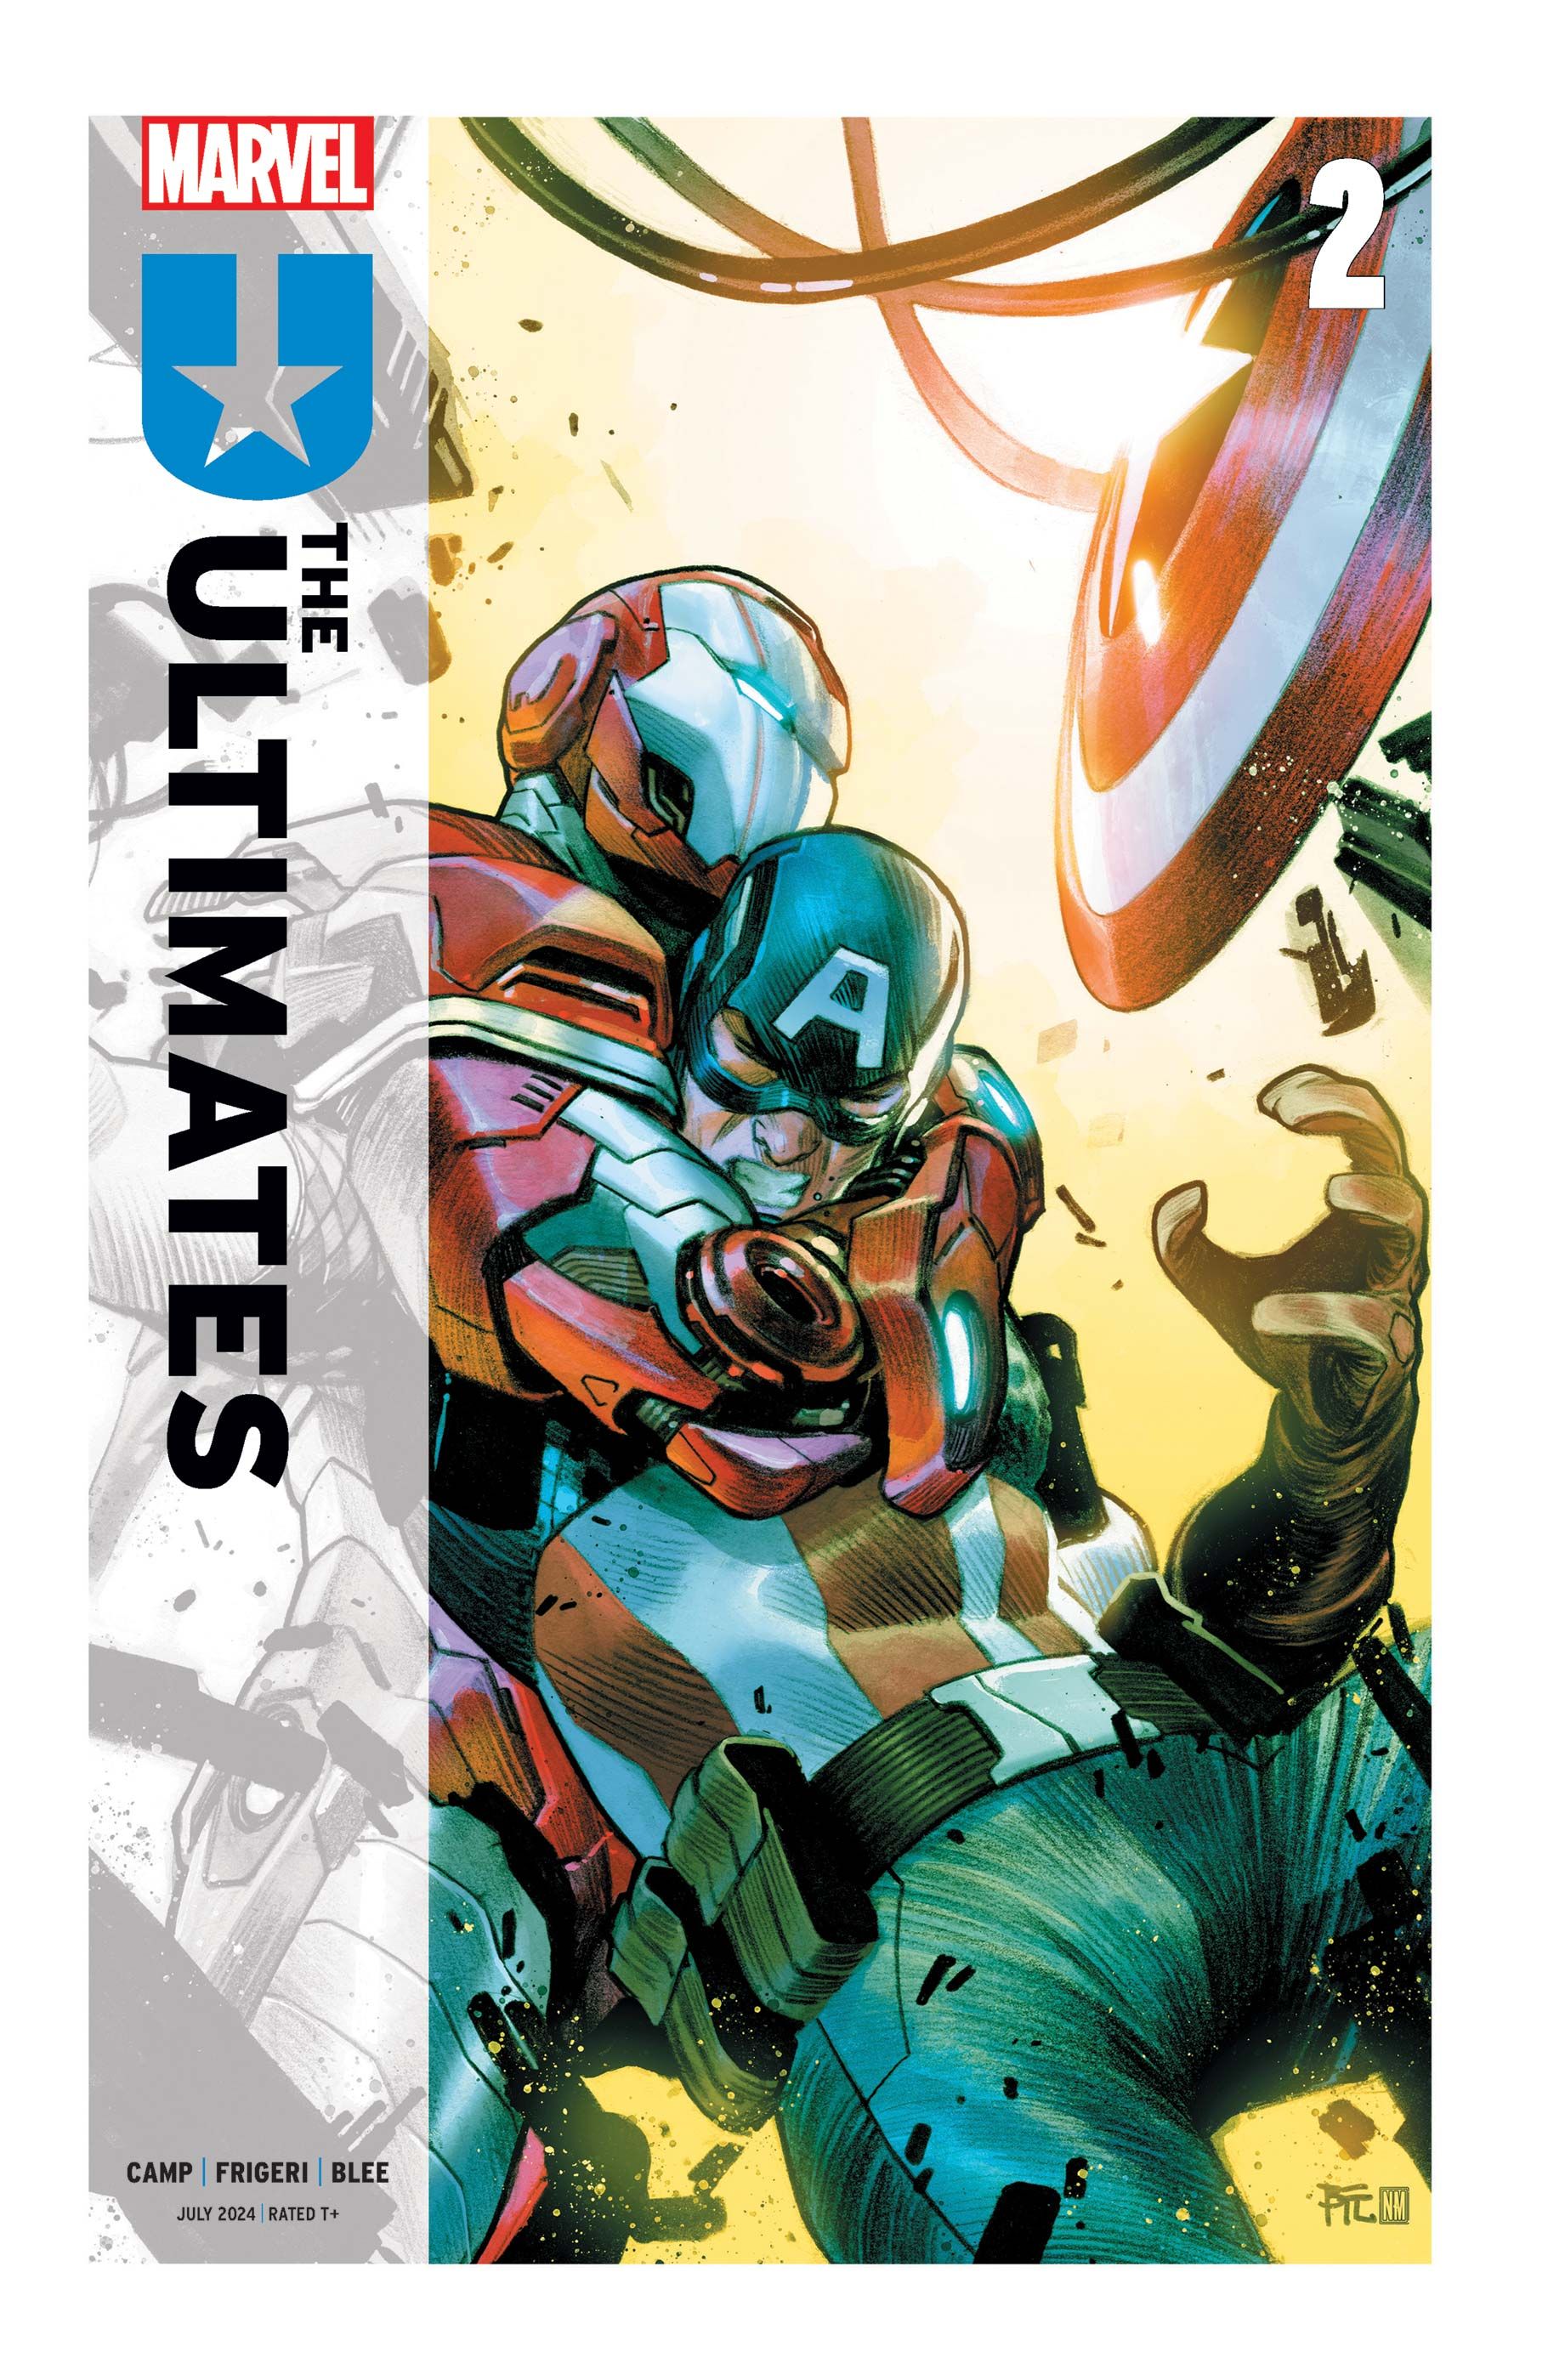 Ultimates #2 cover, Iron Man with Captain America in a headlock.